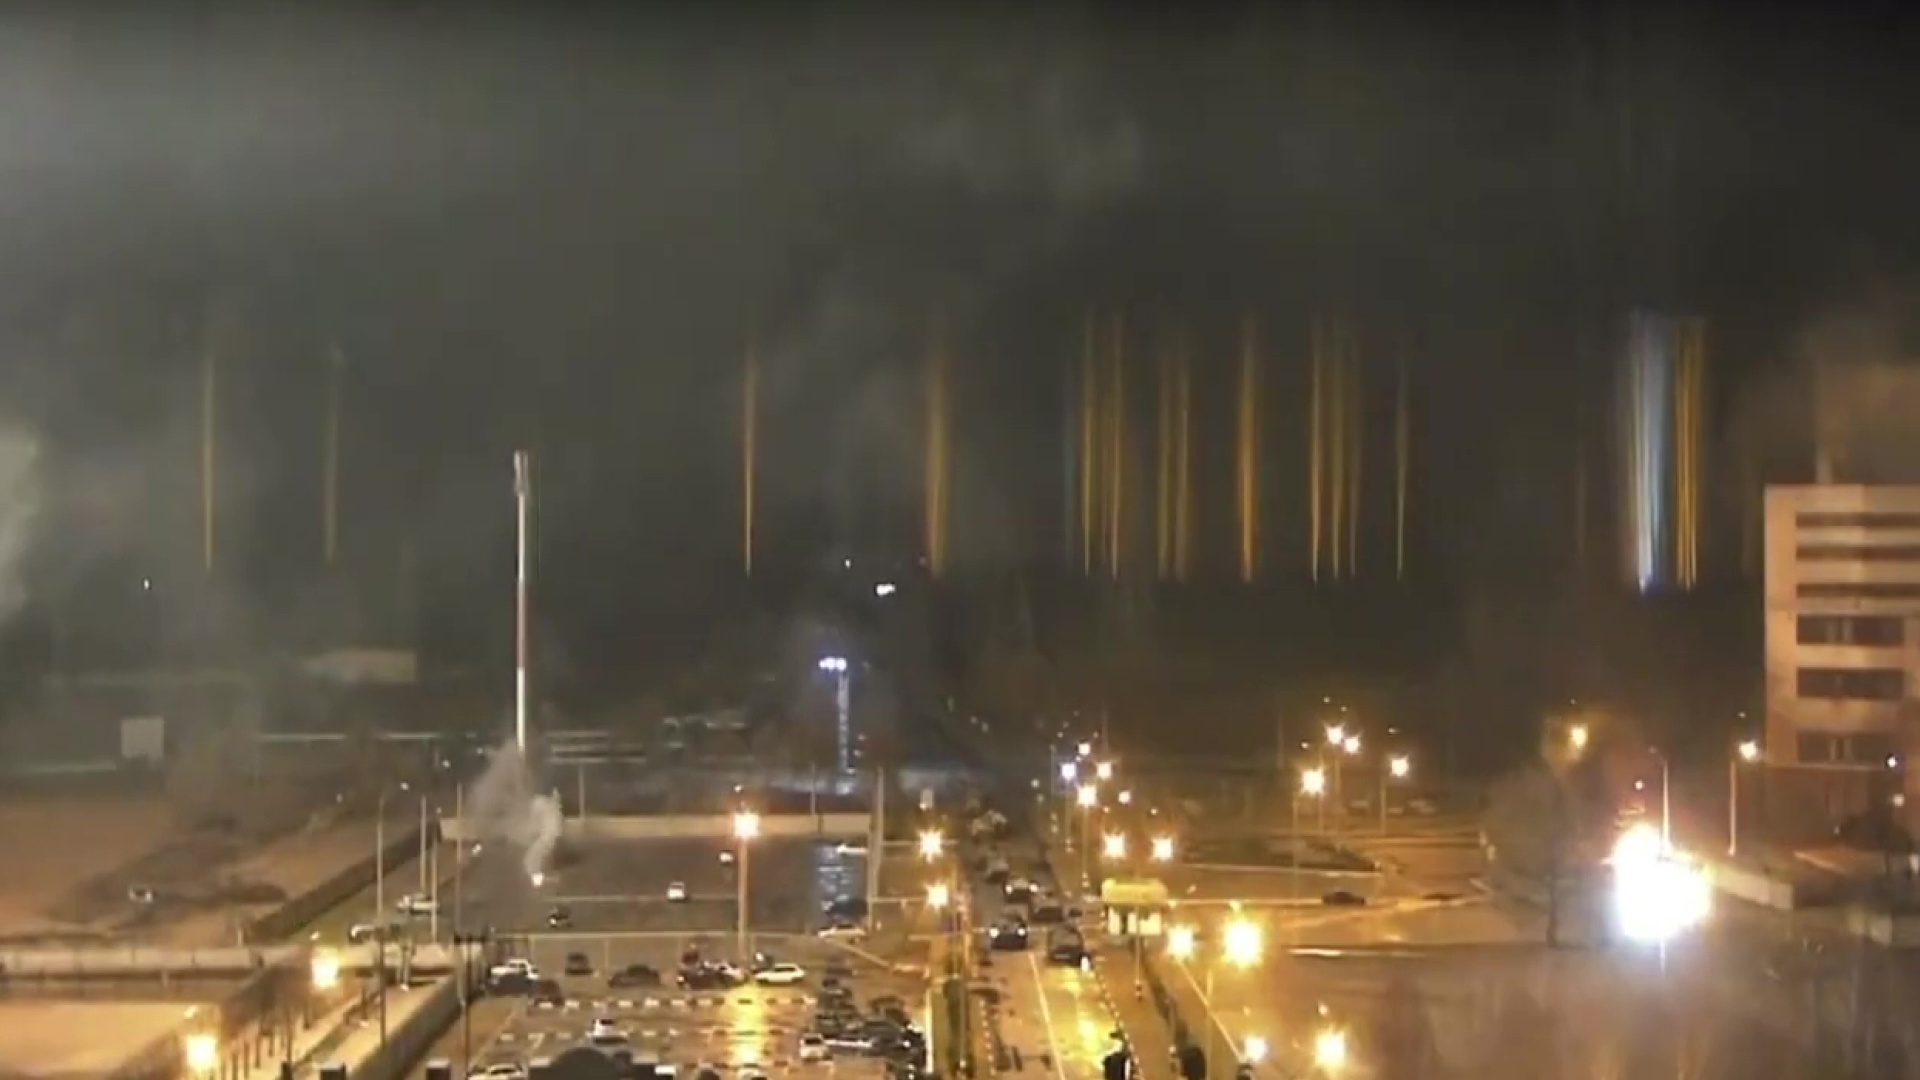 A screenshot from the Zaporizhzhia nuclear power plant's livestream during a fire following fighting between Russian and Ukrainian forces.